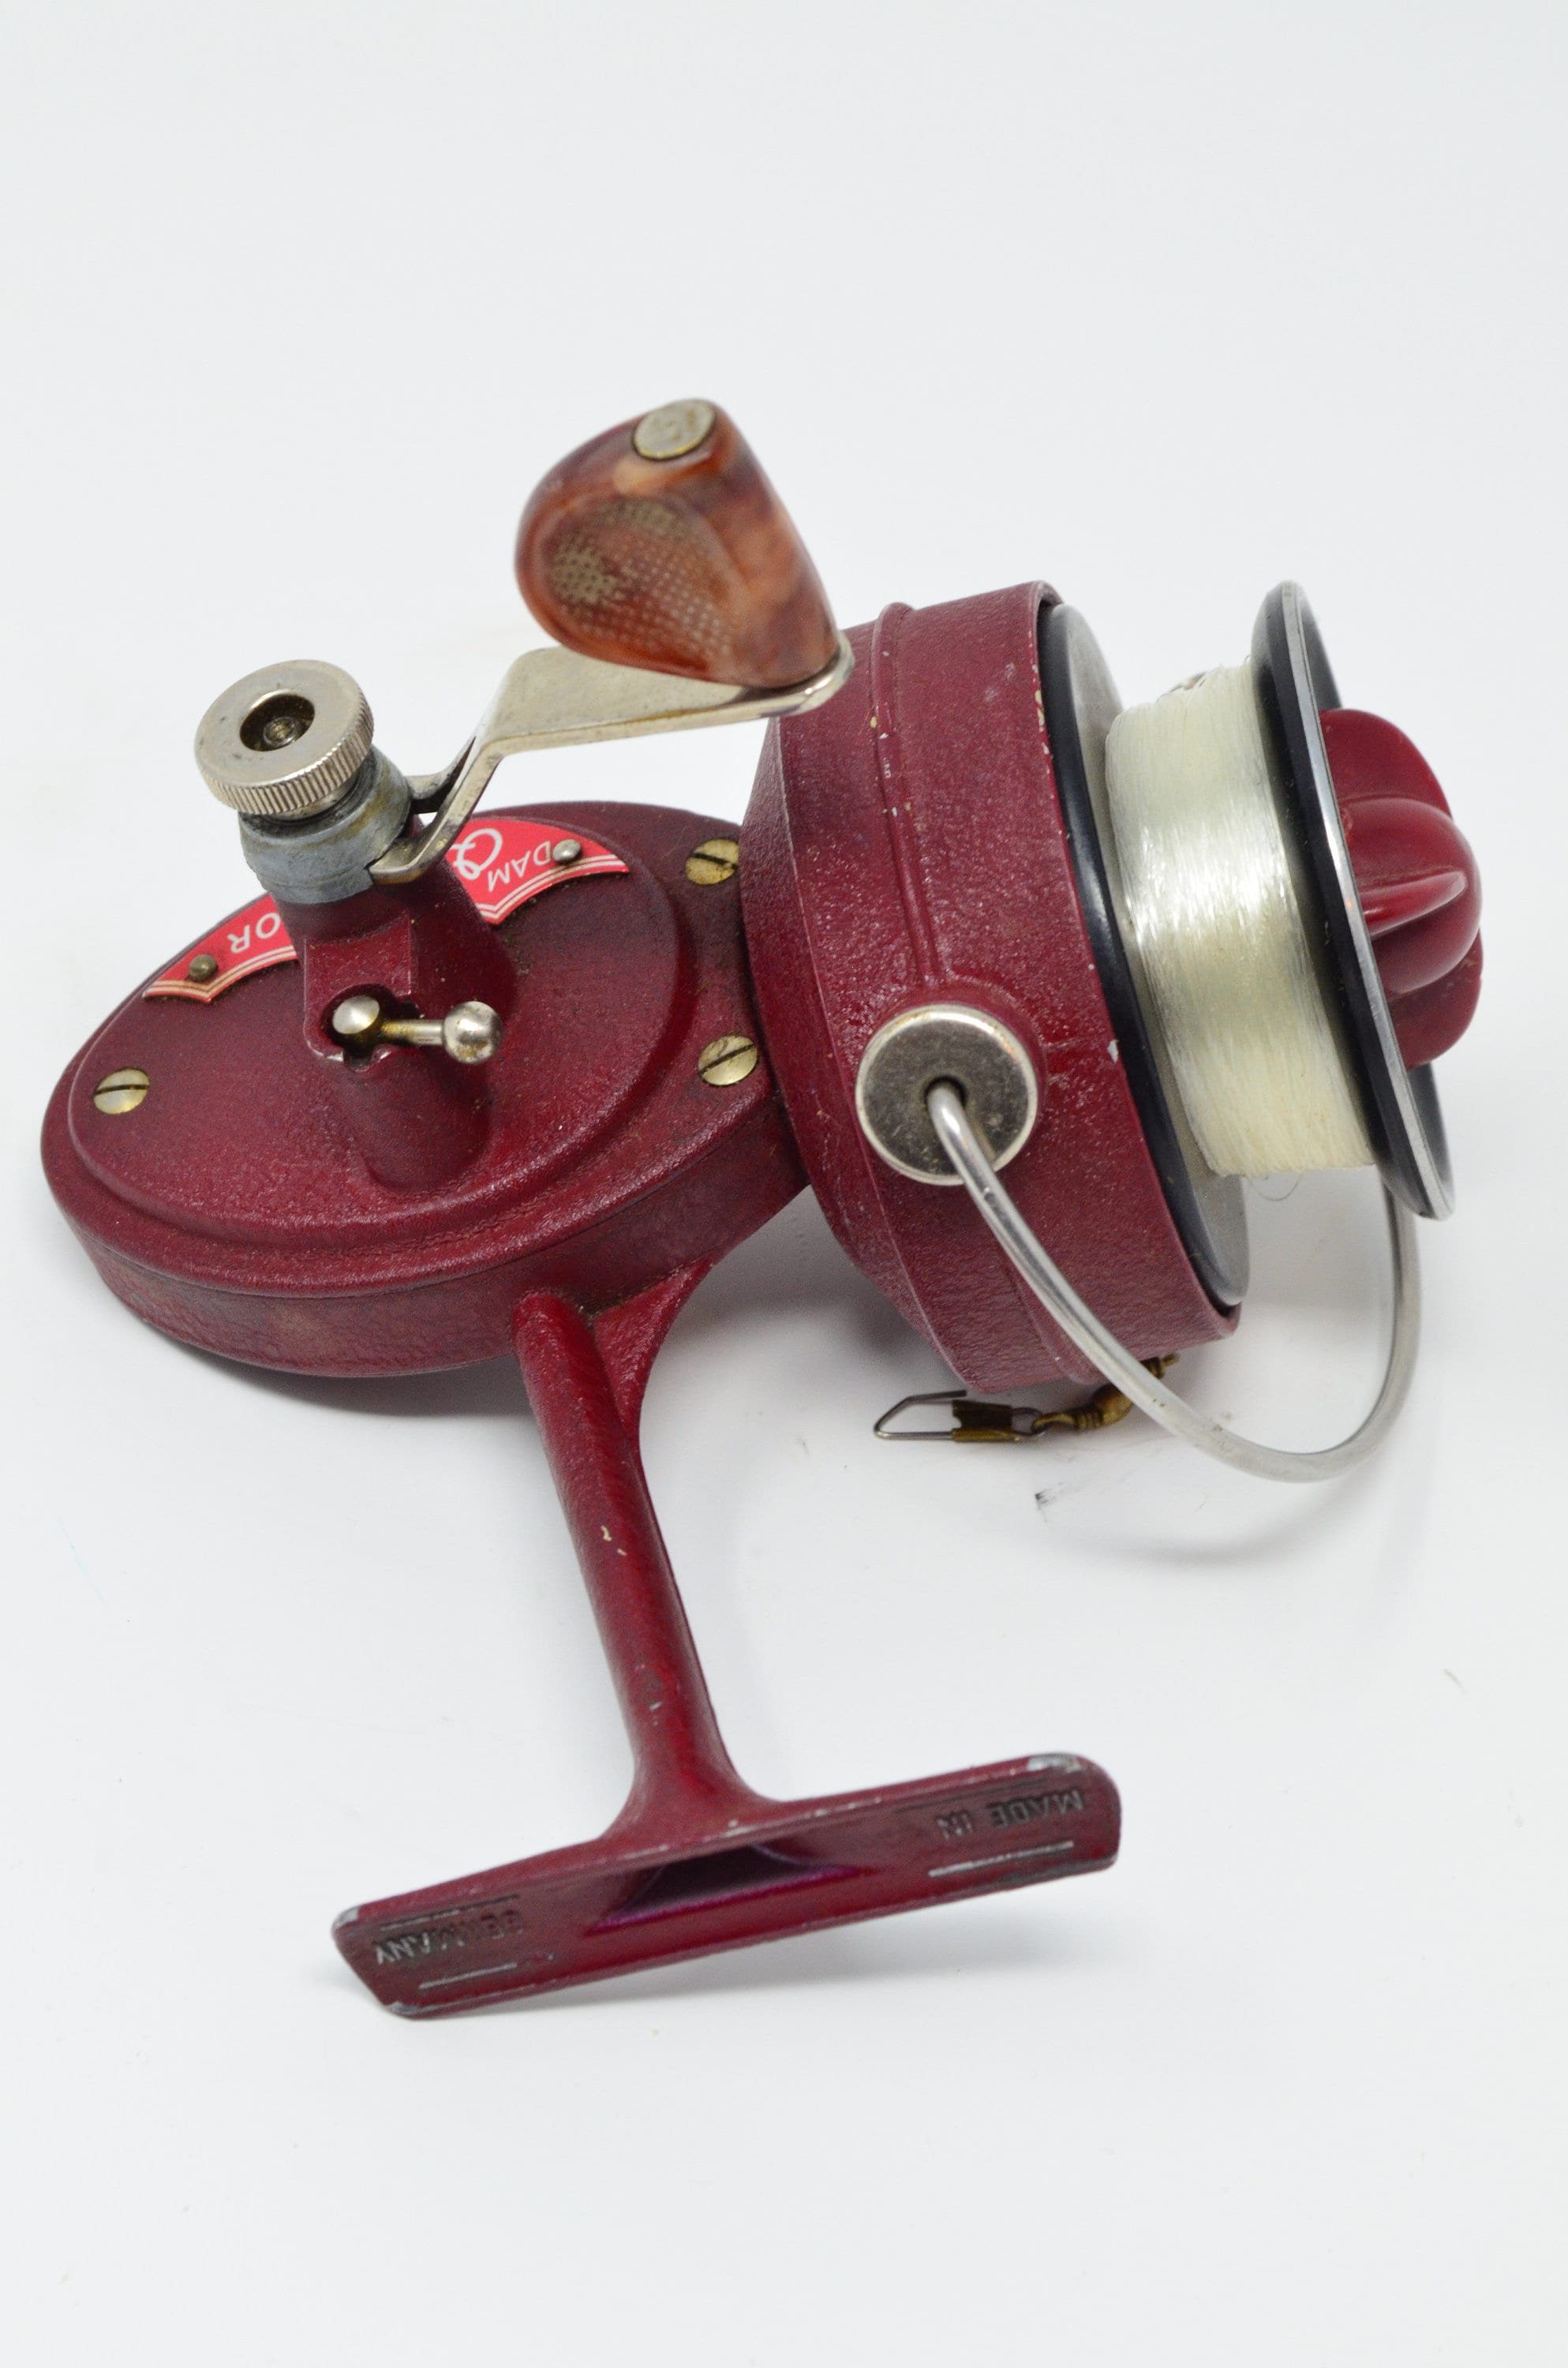 Vintage DAM Quick Junior Spinning Fishing Reel Red Made In Germany